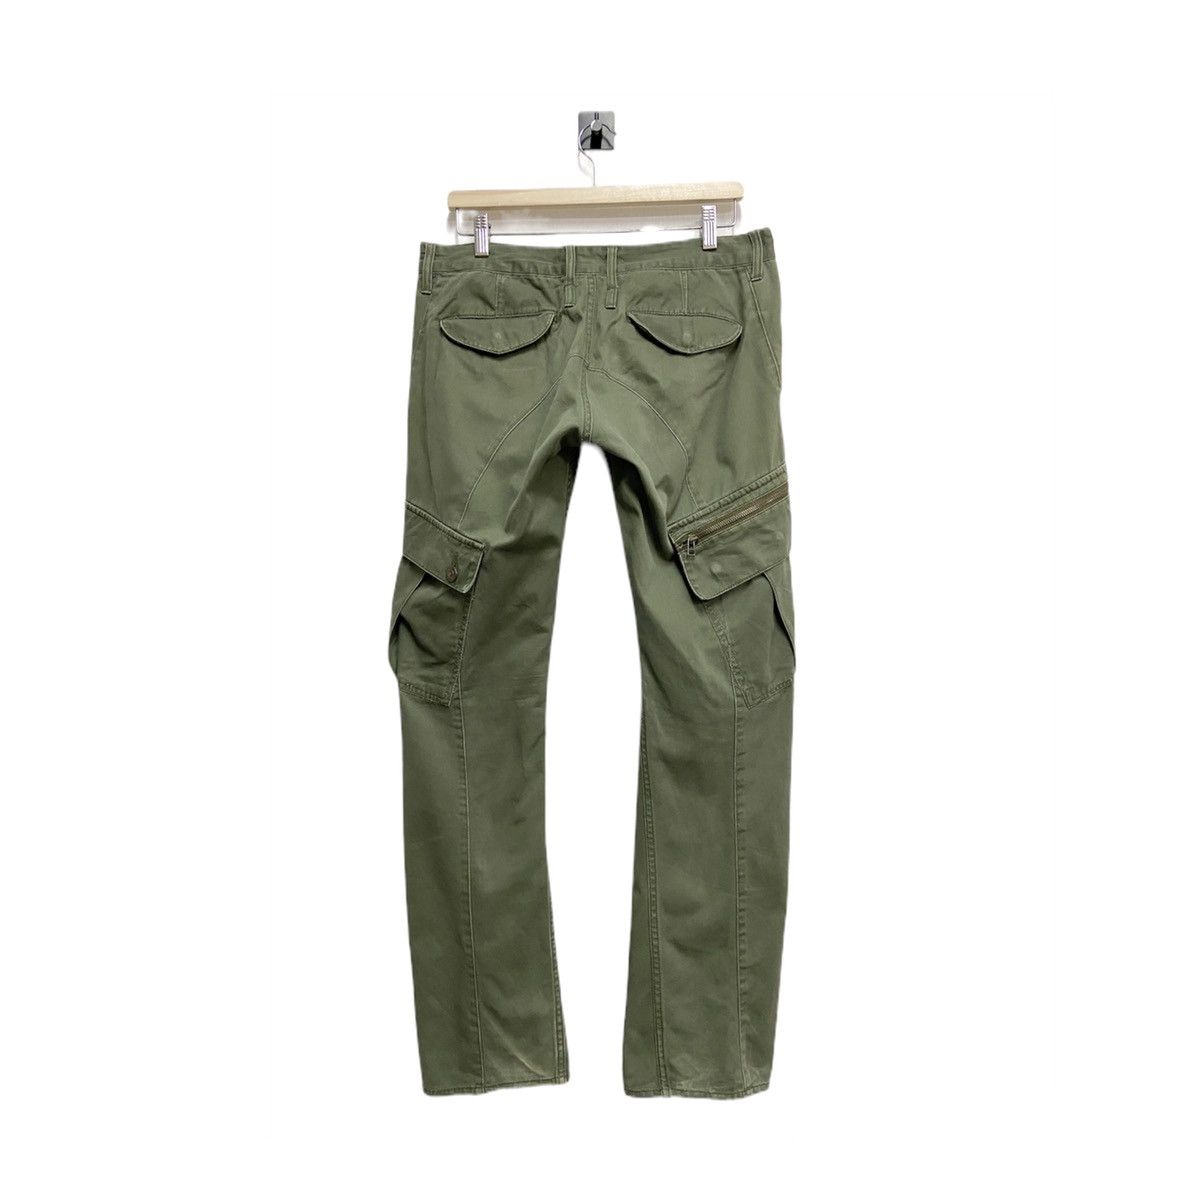 Vintage - Dominate Handcrafted Jeans Cargo Pant - 2